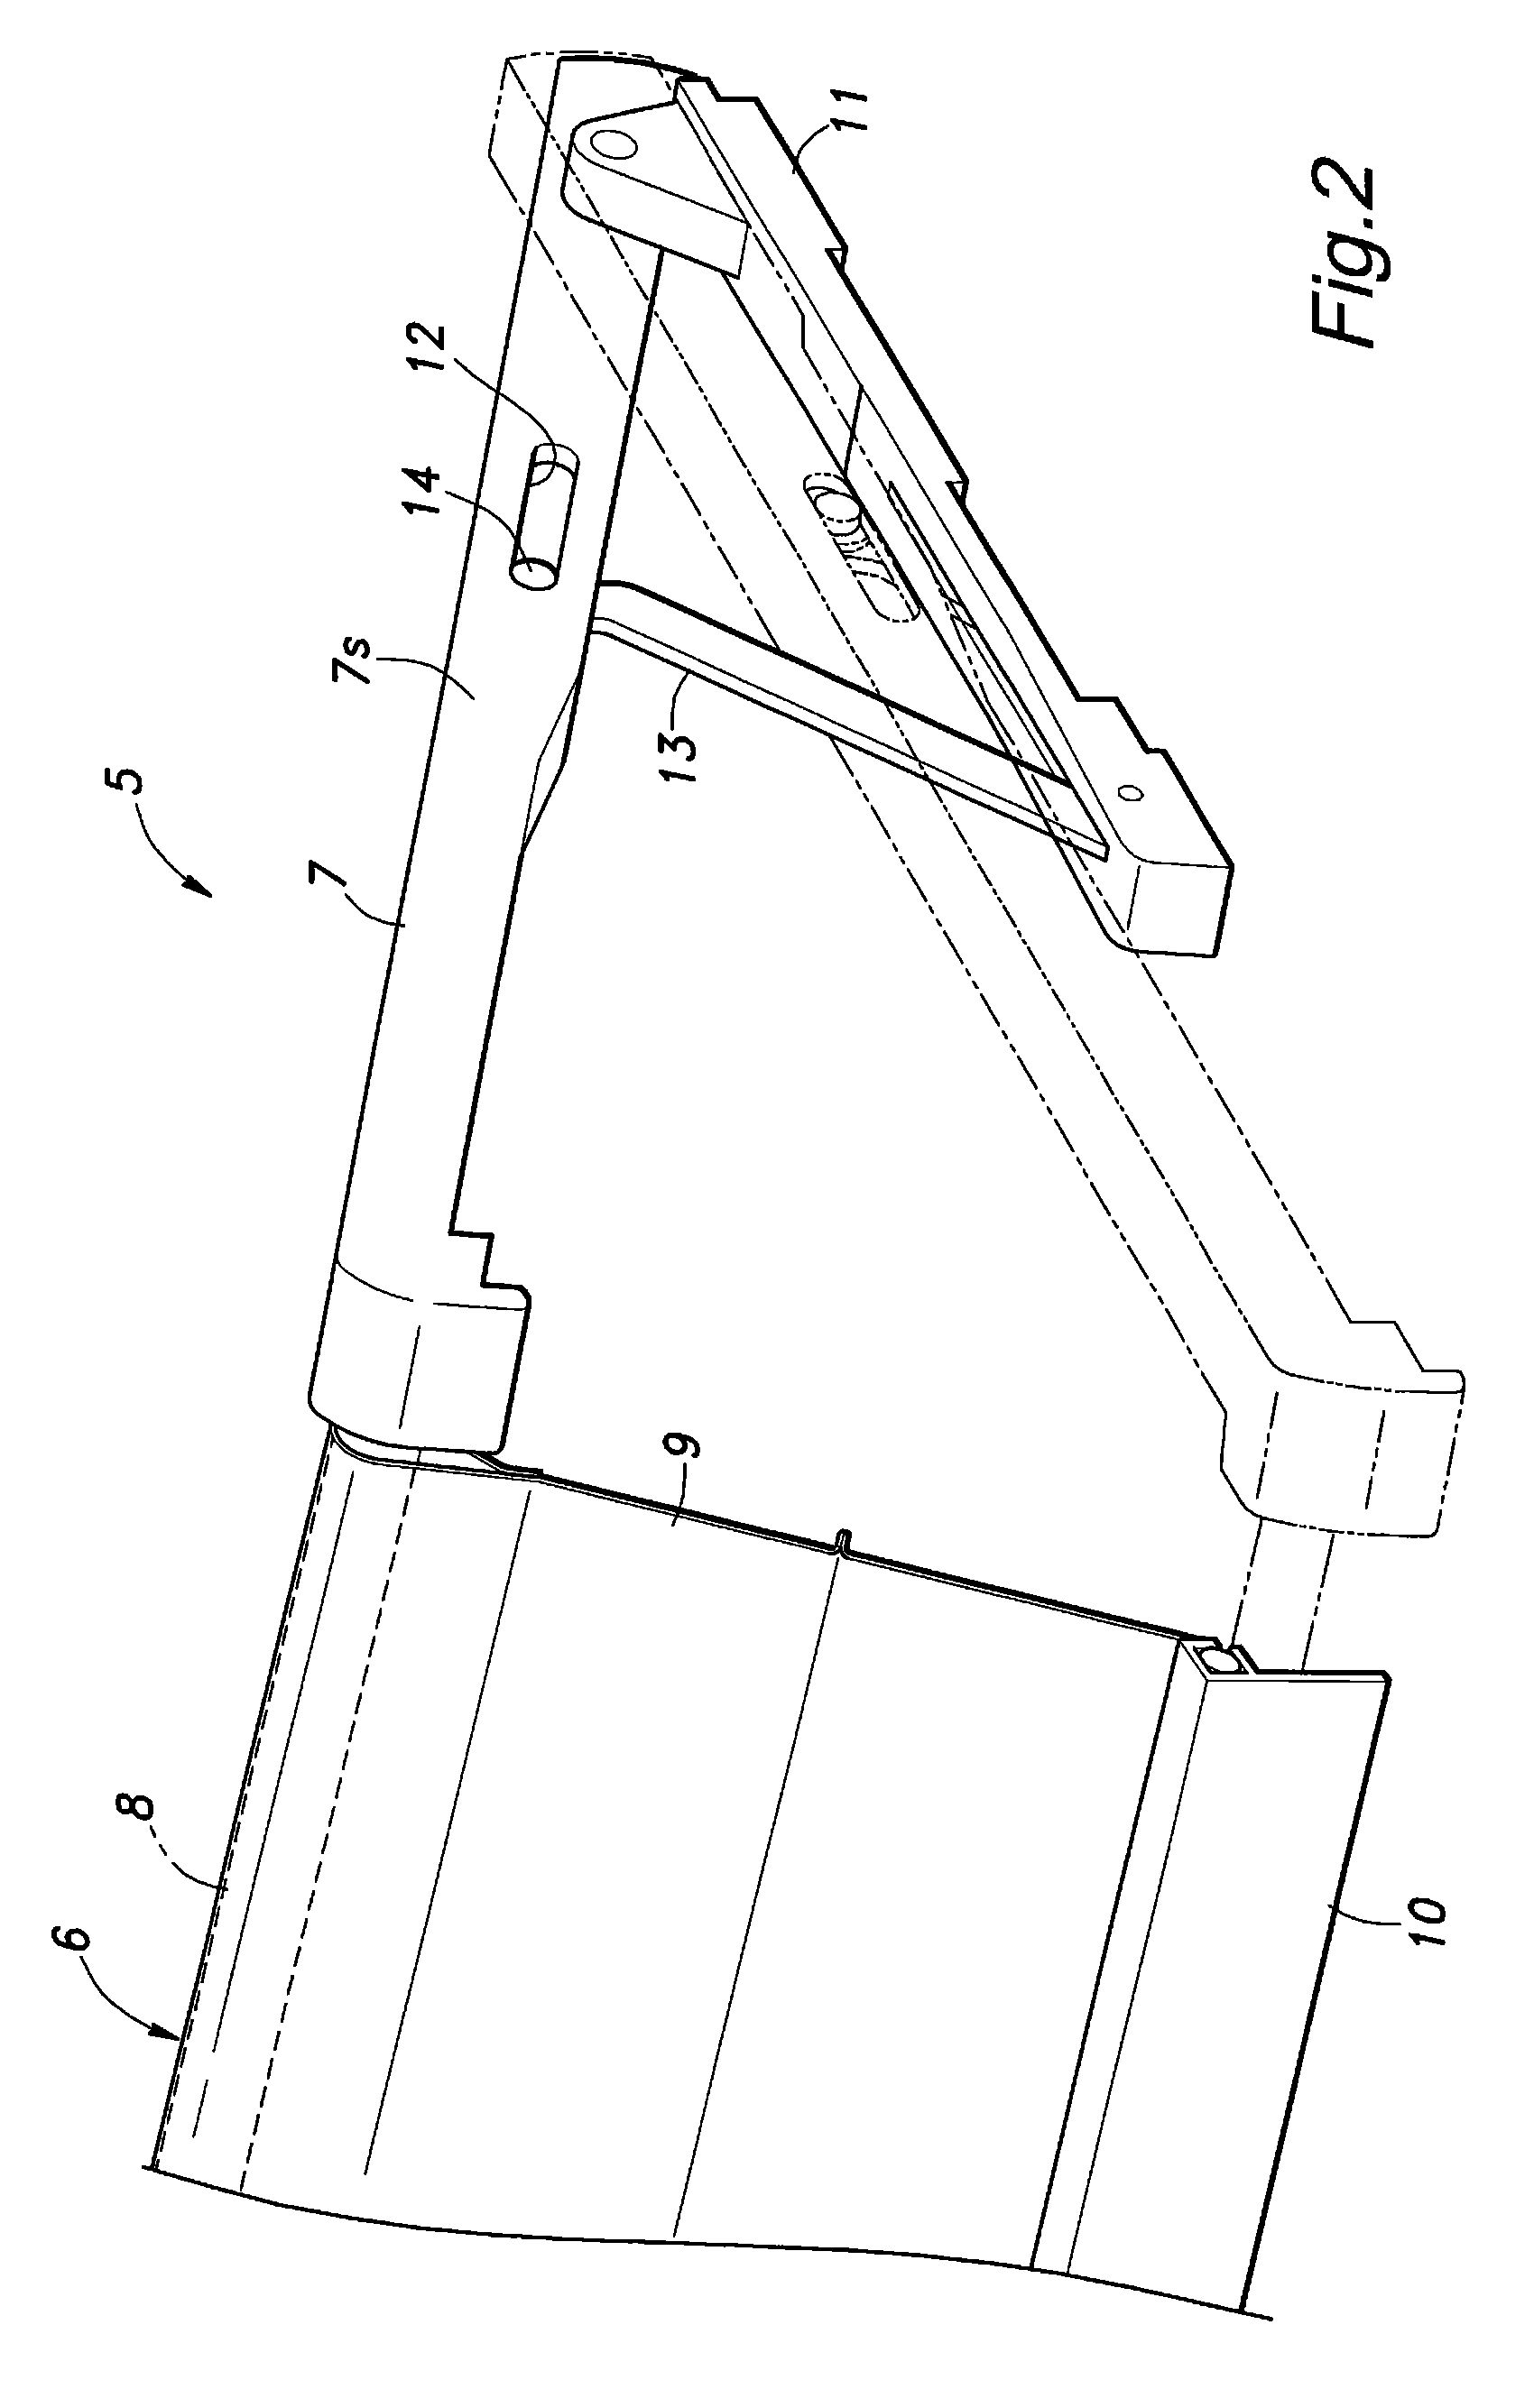 Deflector device for a sunroof device